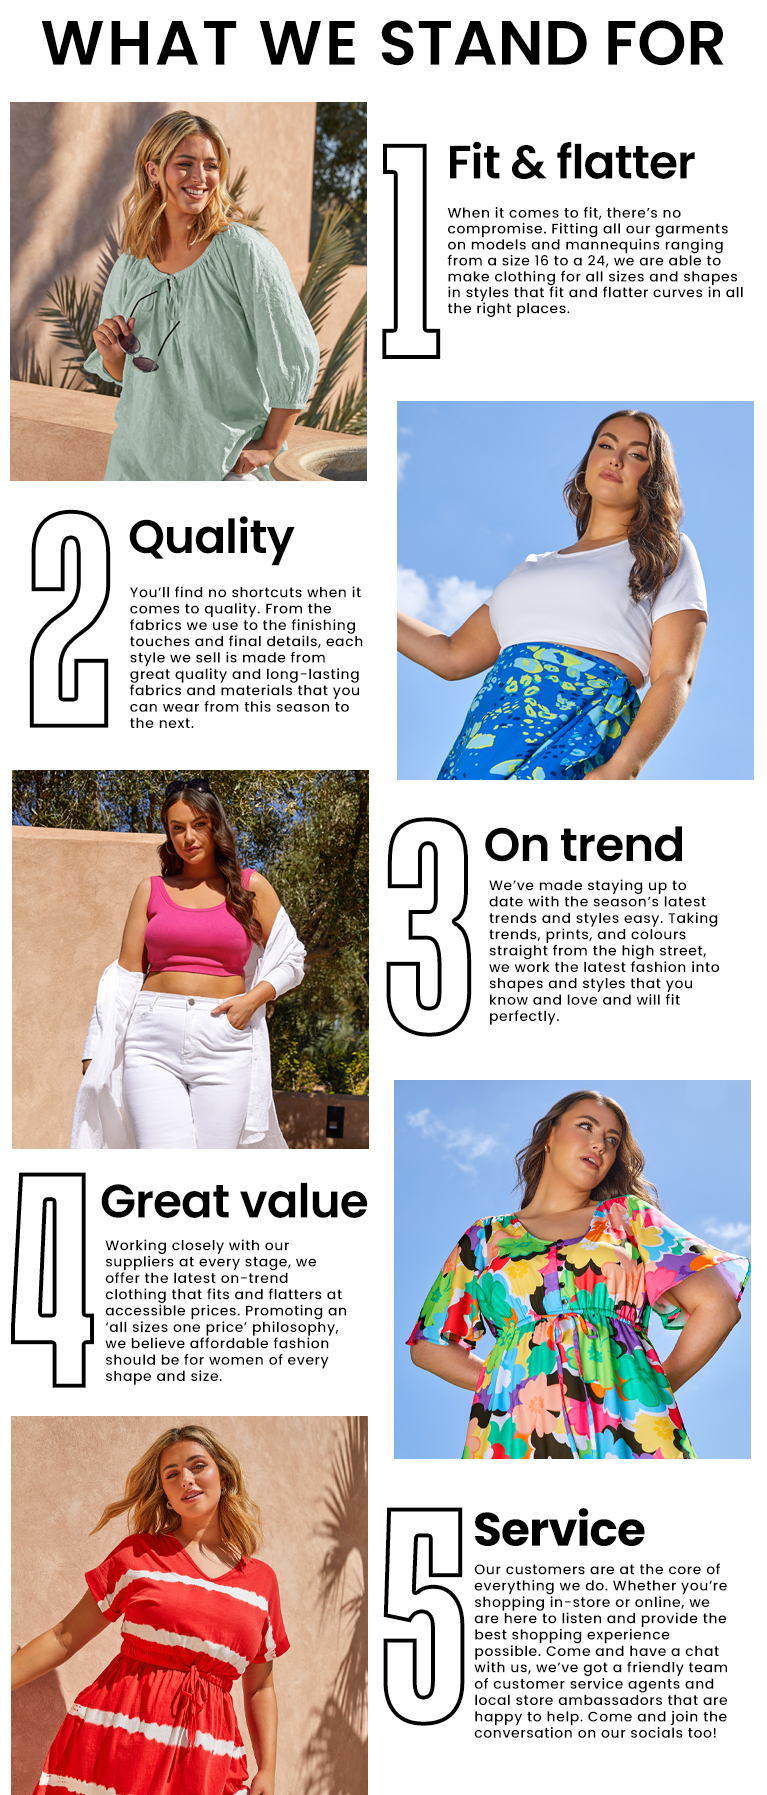 Best work clothes for women: The 16 top brands we reviewed